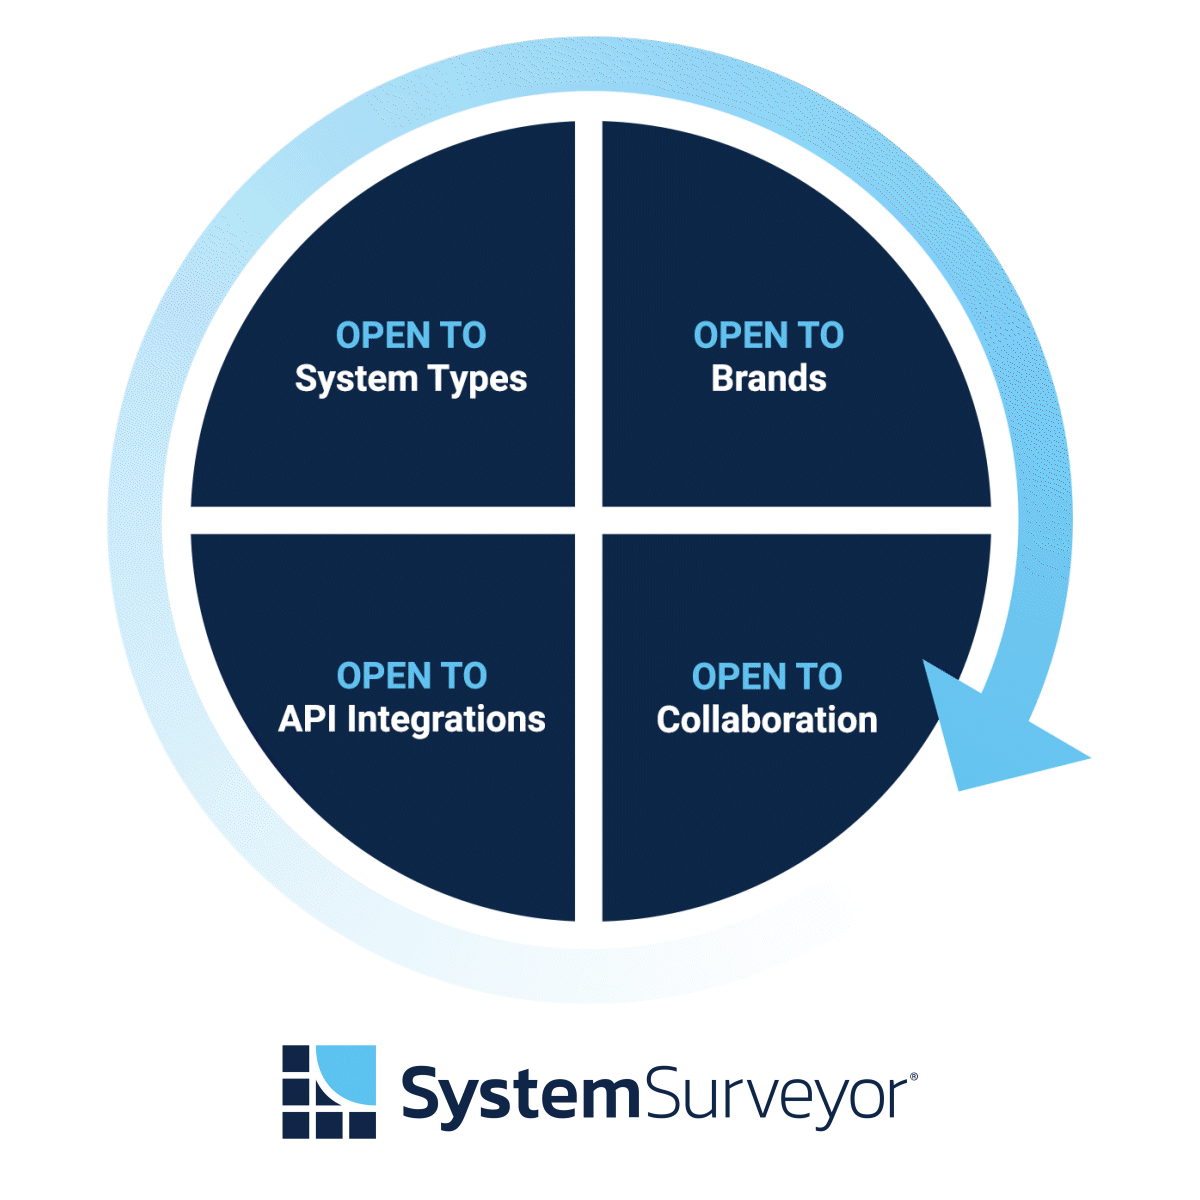 System Surveyor is an open system, including system types, brands, API integrations and collaboration.